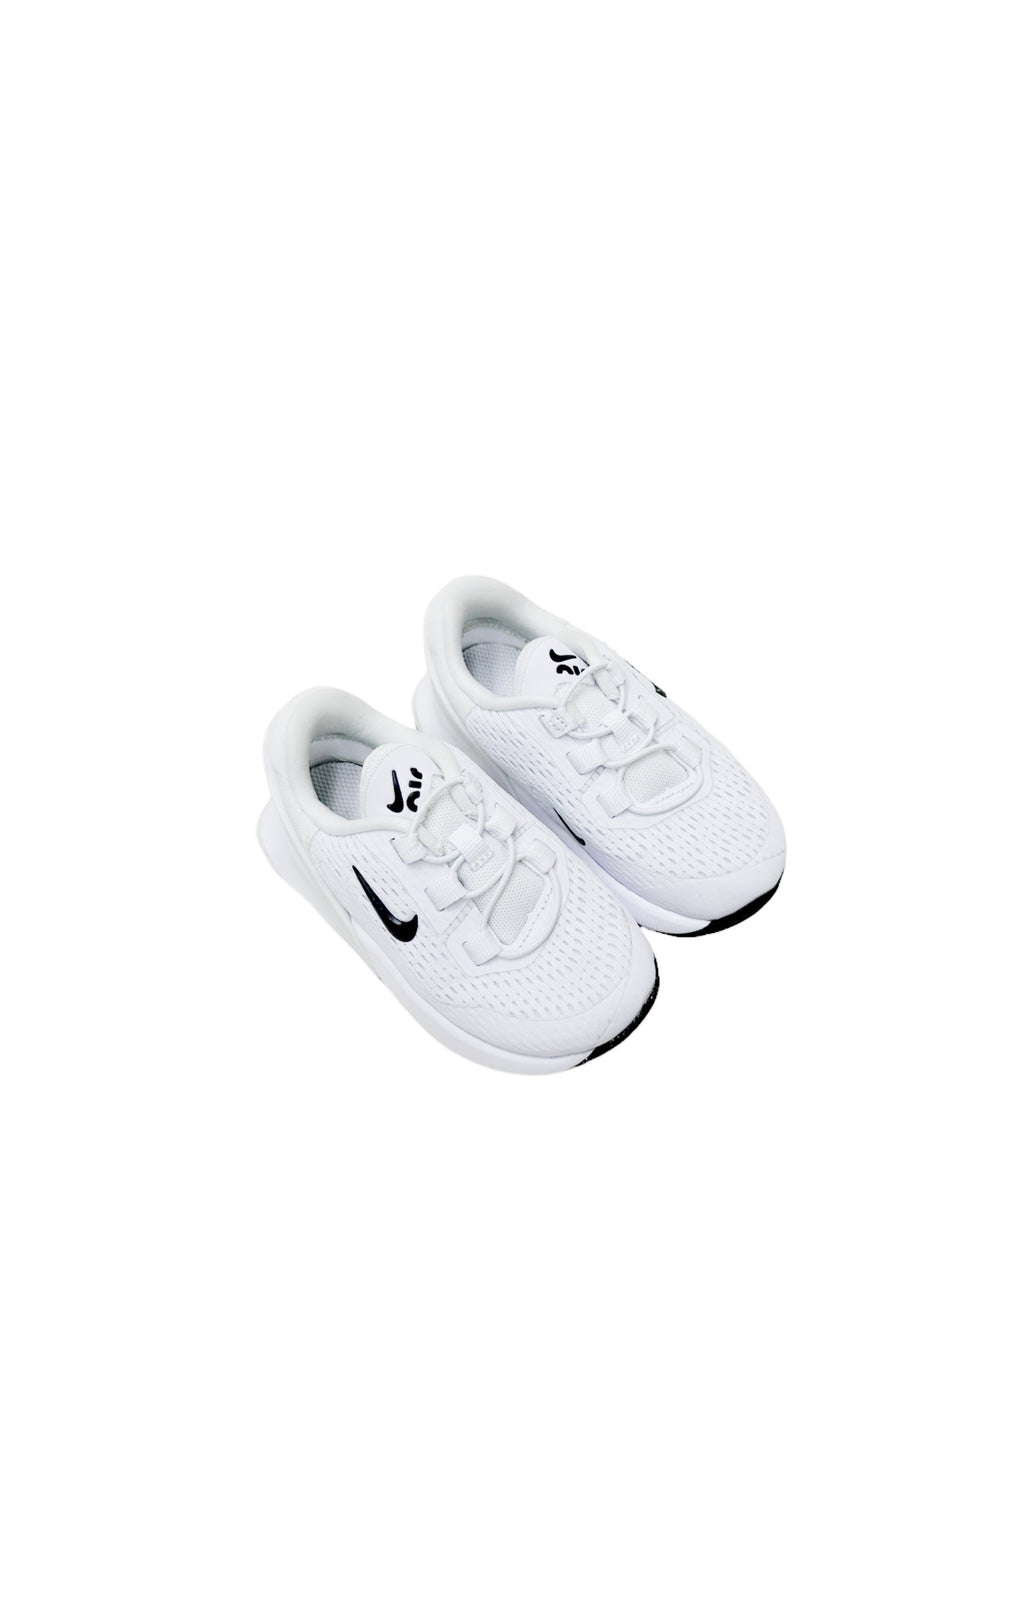 NIKE Sneakers Size: Infant US 6C